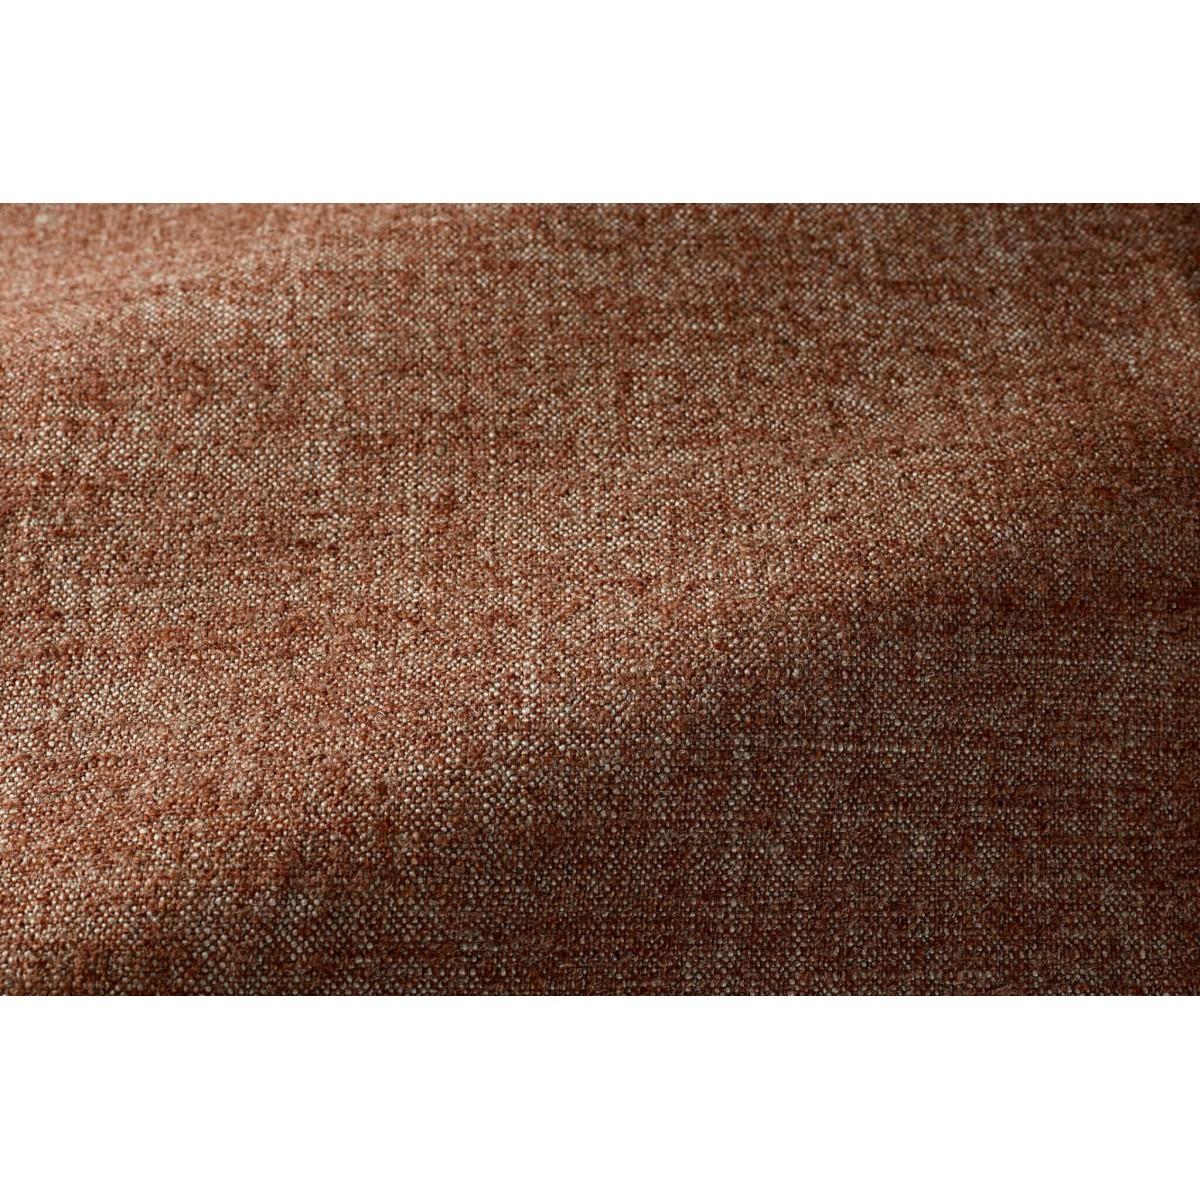 Popus editions Graziella 3 seater sofa in terracotta London linen fabric.

A foot that hides another. A cushion that hides another. A curve that hides another with contemporary lines and a base like a punctuation mark, this sofa gives pride of